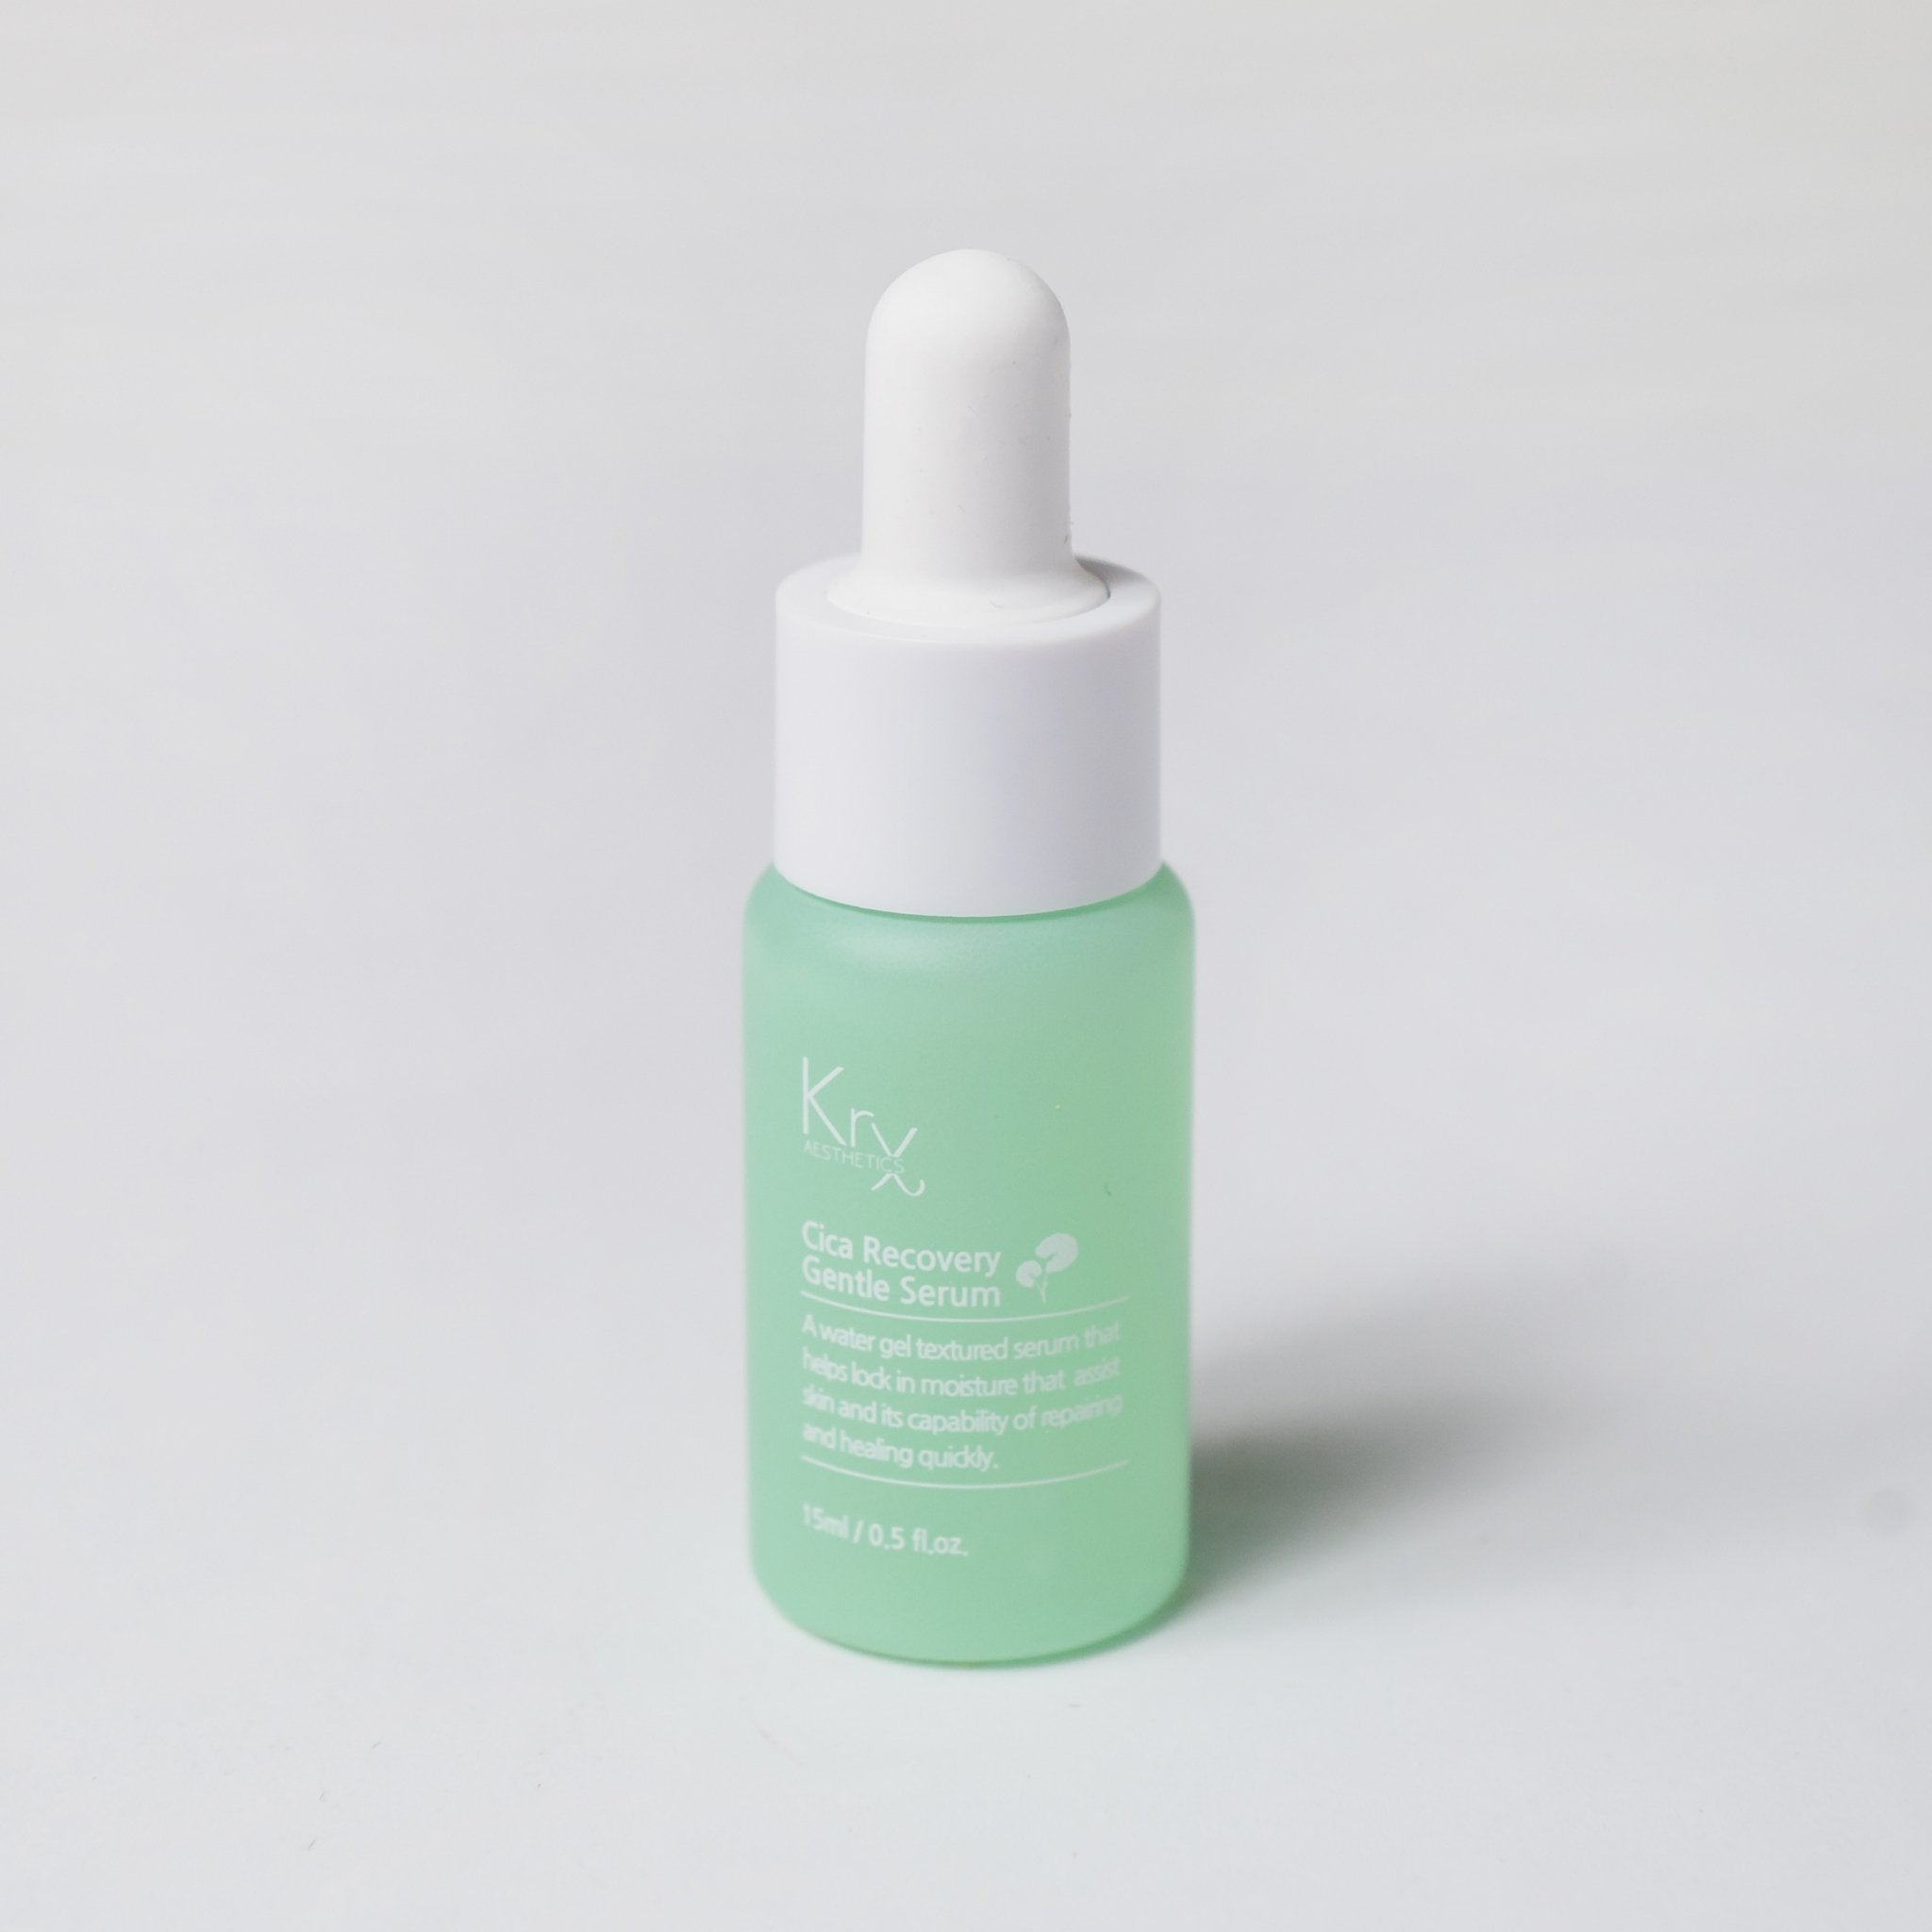 KrX Cica Recovery Gentle Serum - by Kin Aesthetics 